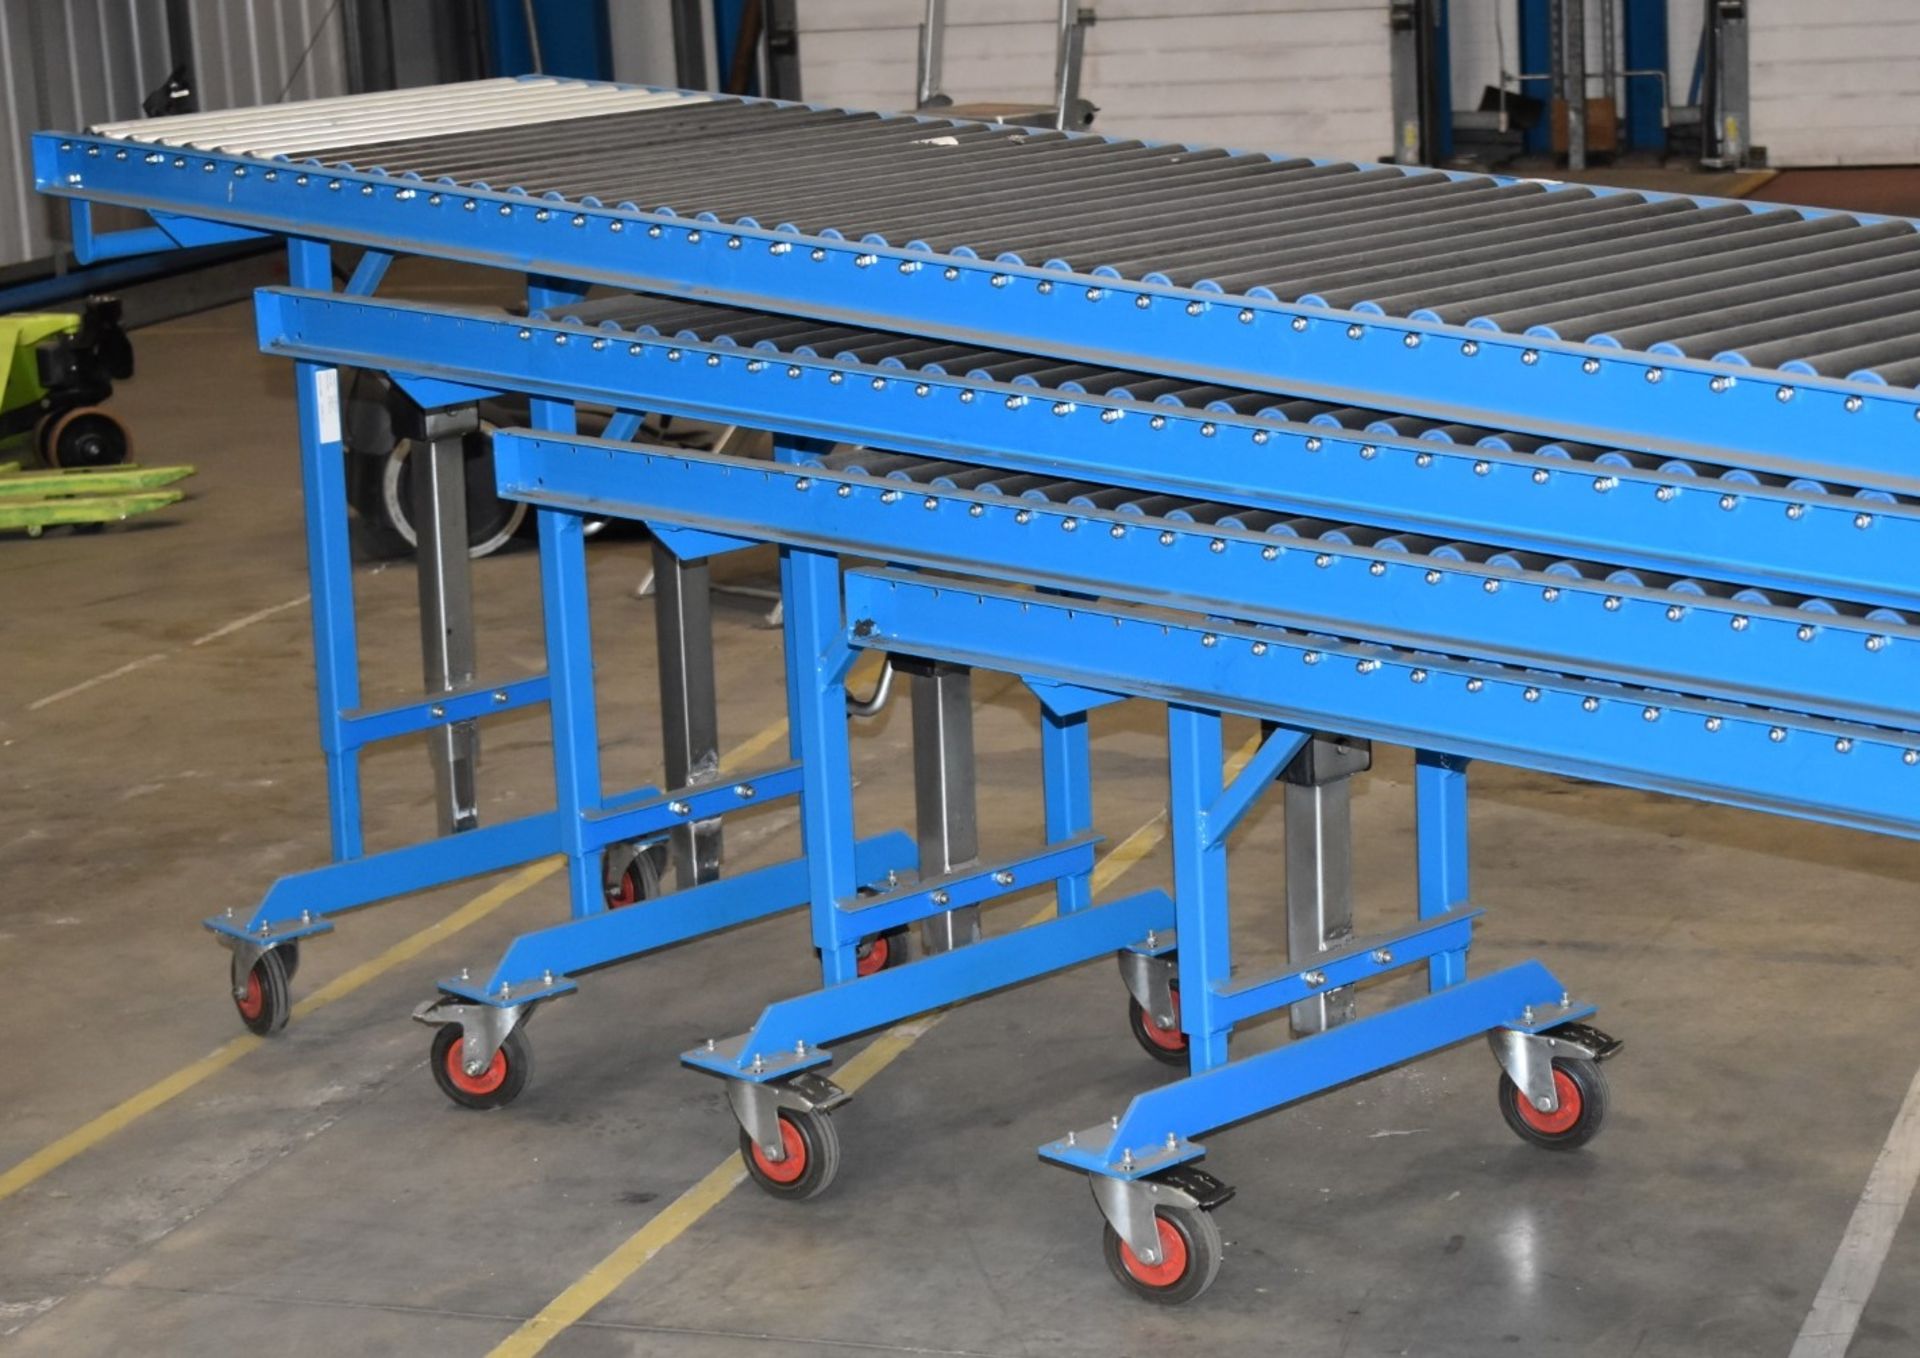 1 x Adjustable Manual Gravity Telescopic Conveyor - For Loading Trucks - Ref FE193A - CL480 - - Image 9 of 9